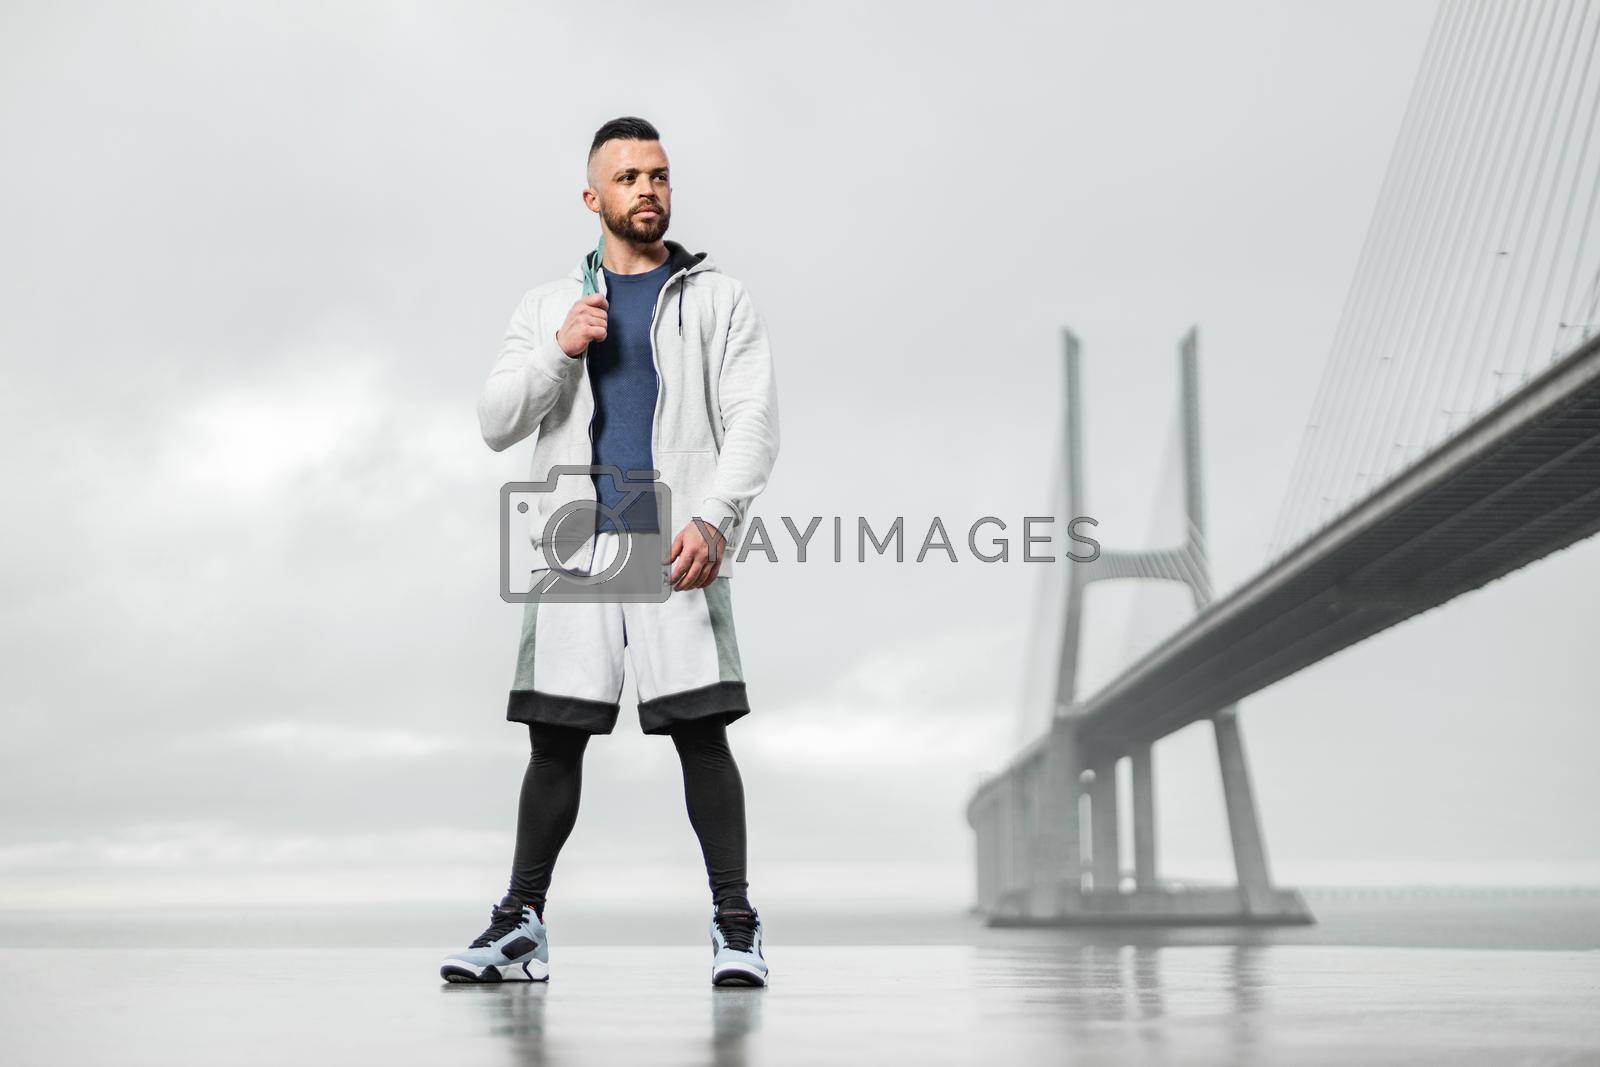 Royalty free image of Athletic man before morning run outdoors by MikeOrlov